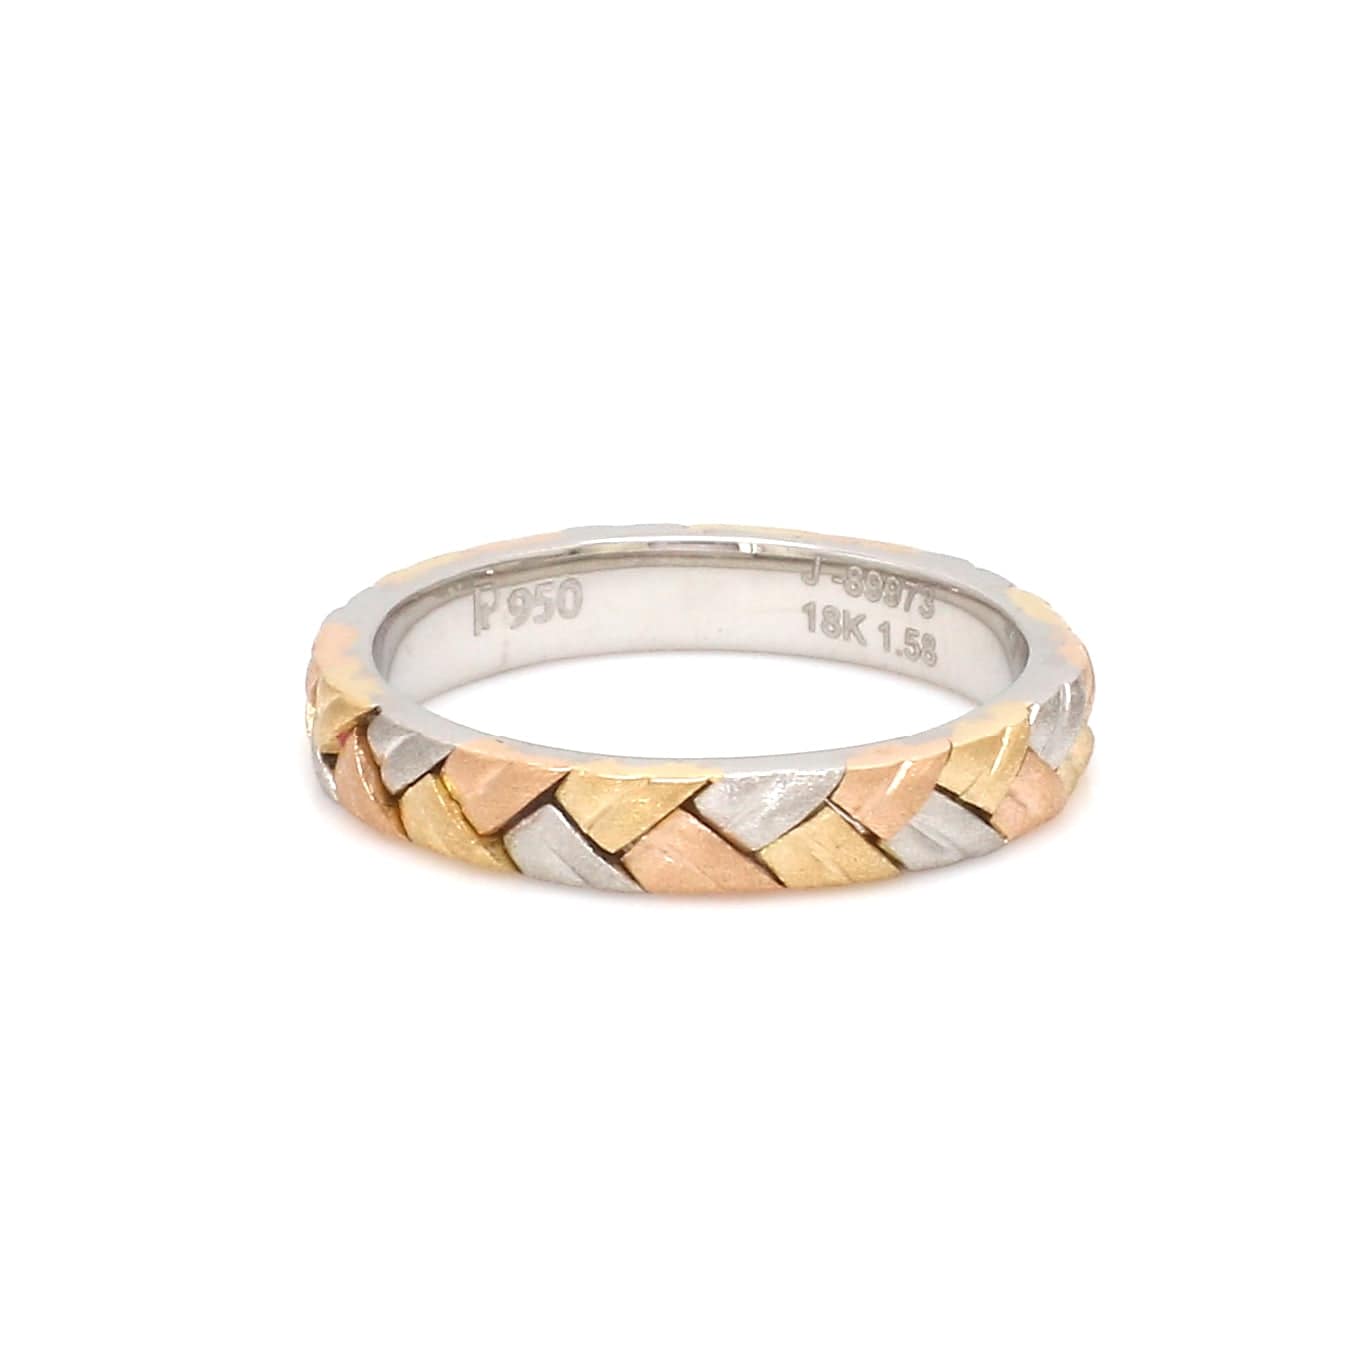 Shop Majestic Pretty Gold Rings | Exquisite Band Rings at GRT Jewels